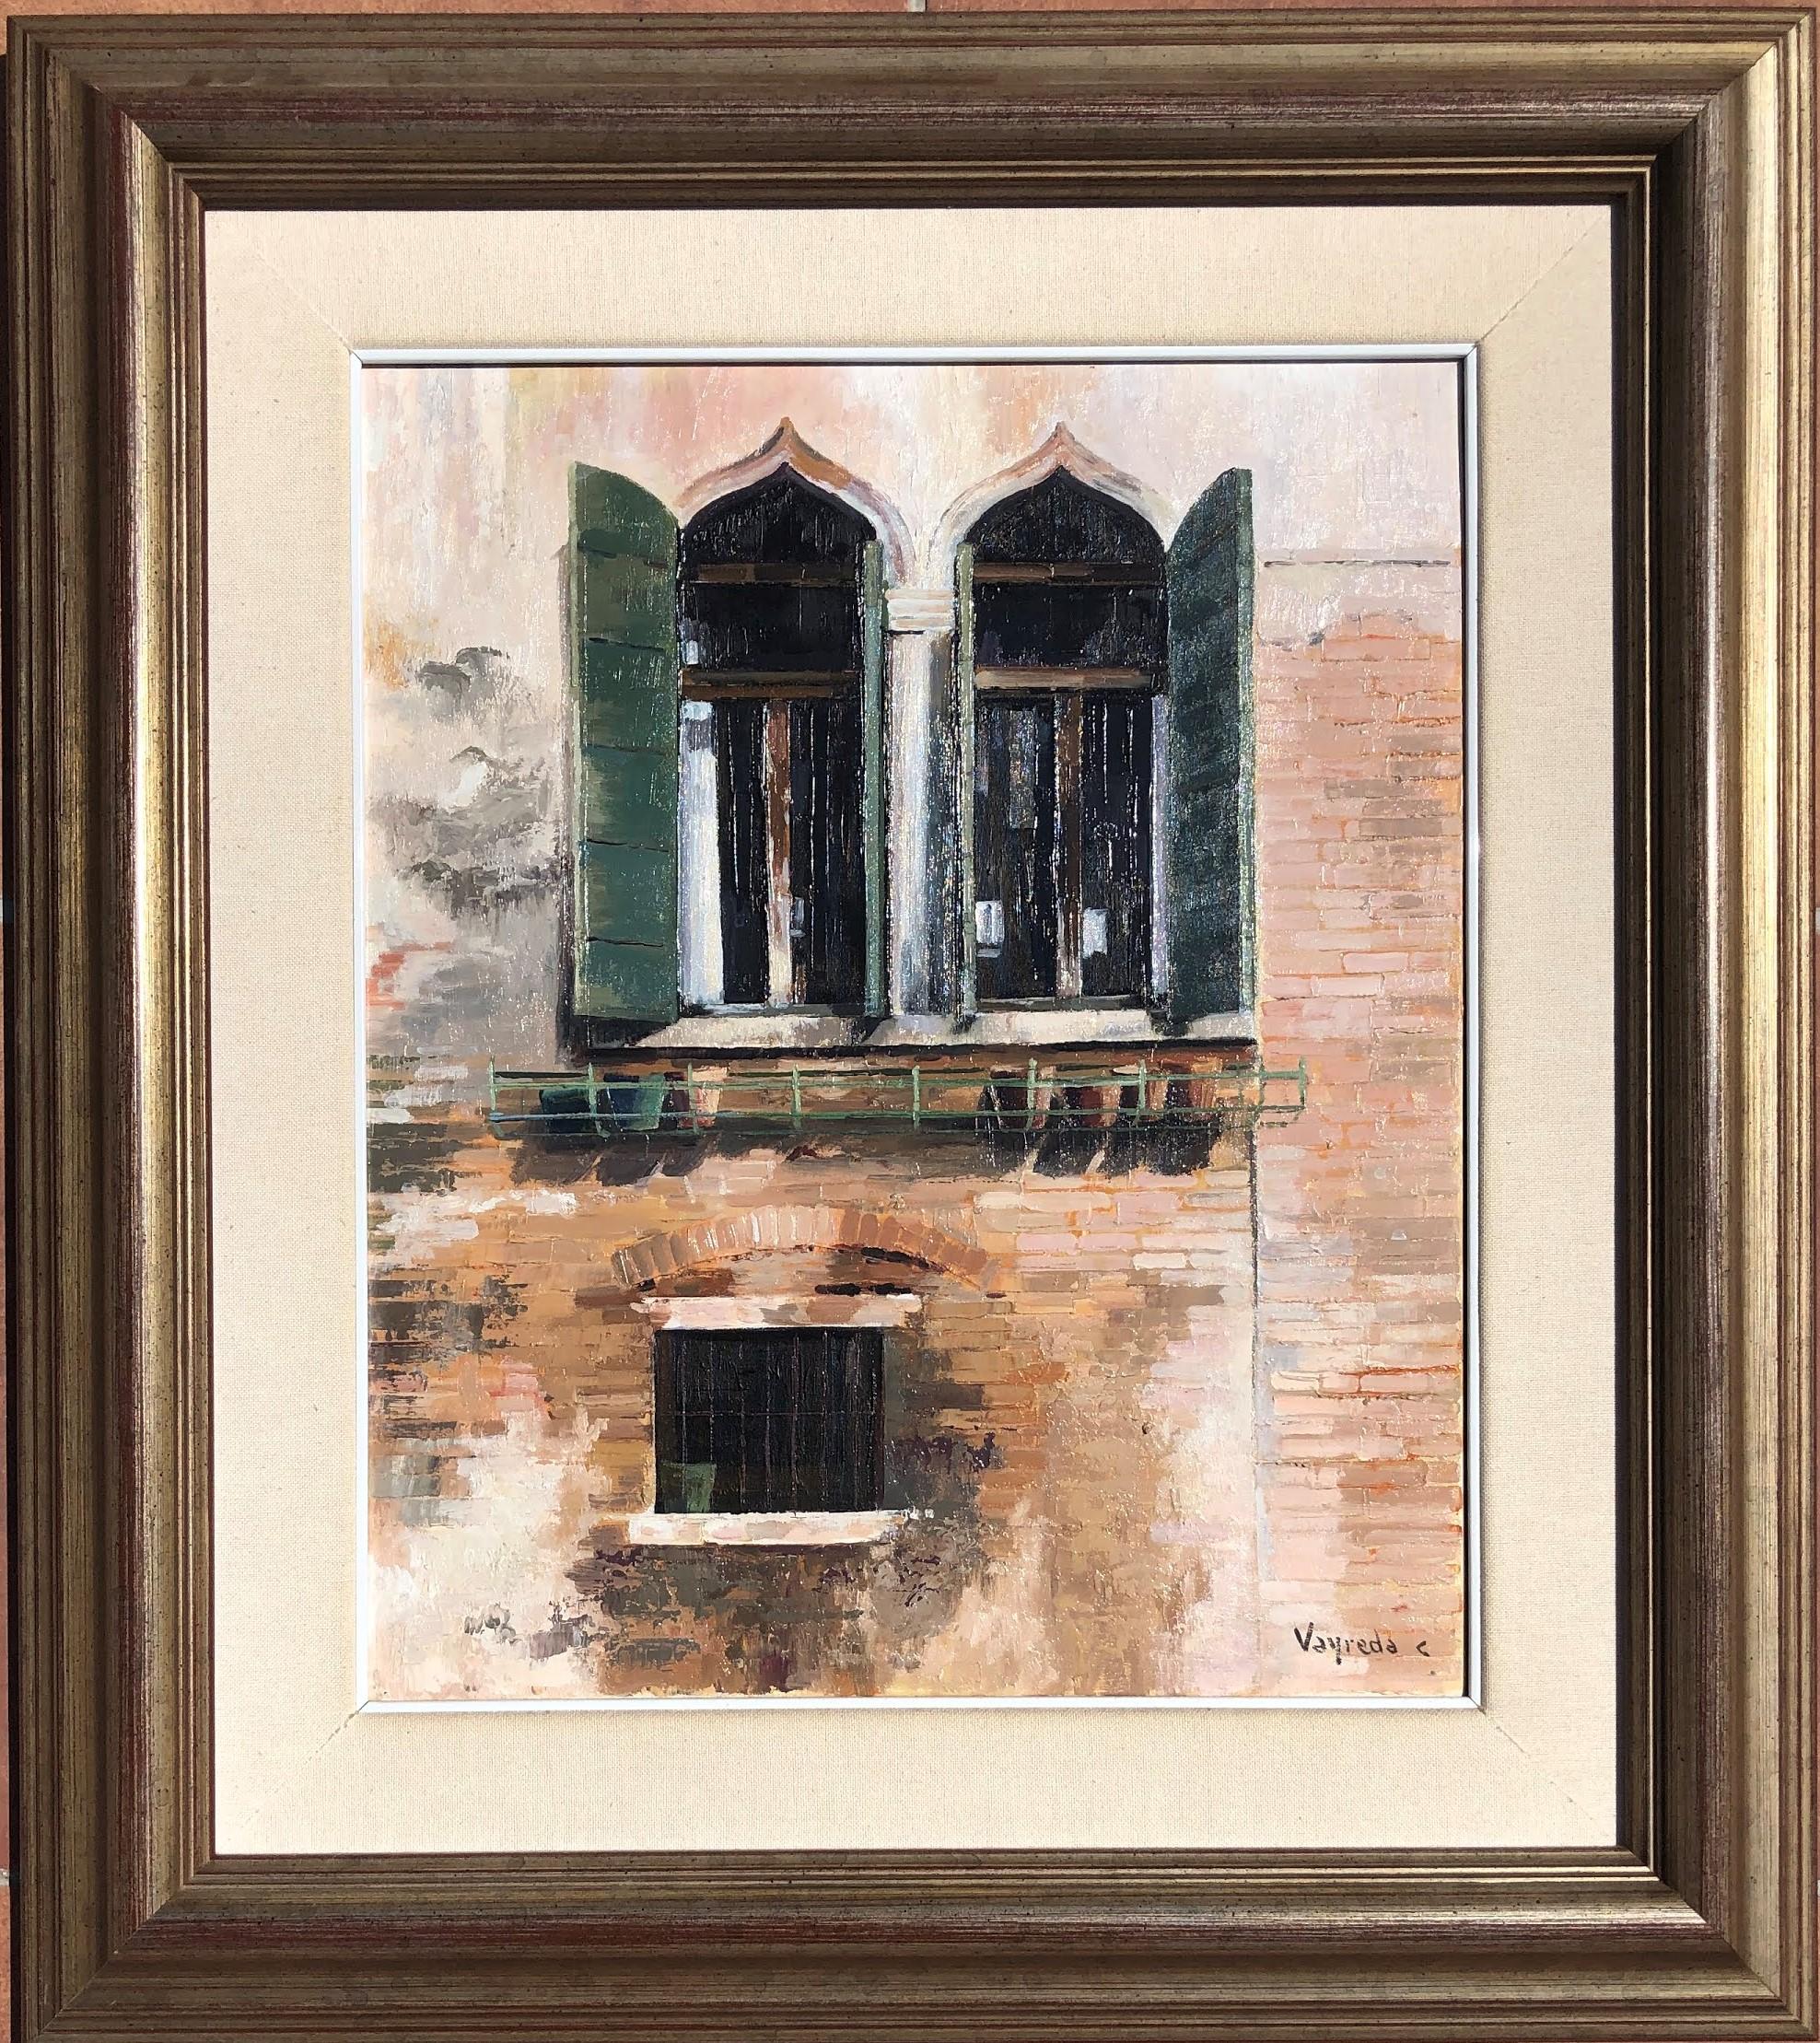 Venice window original oil on canvas painting - Painting by Josep Maria Vayreda Canadell